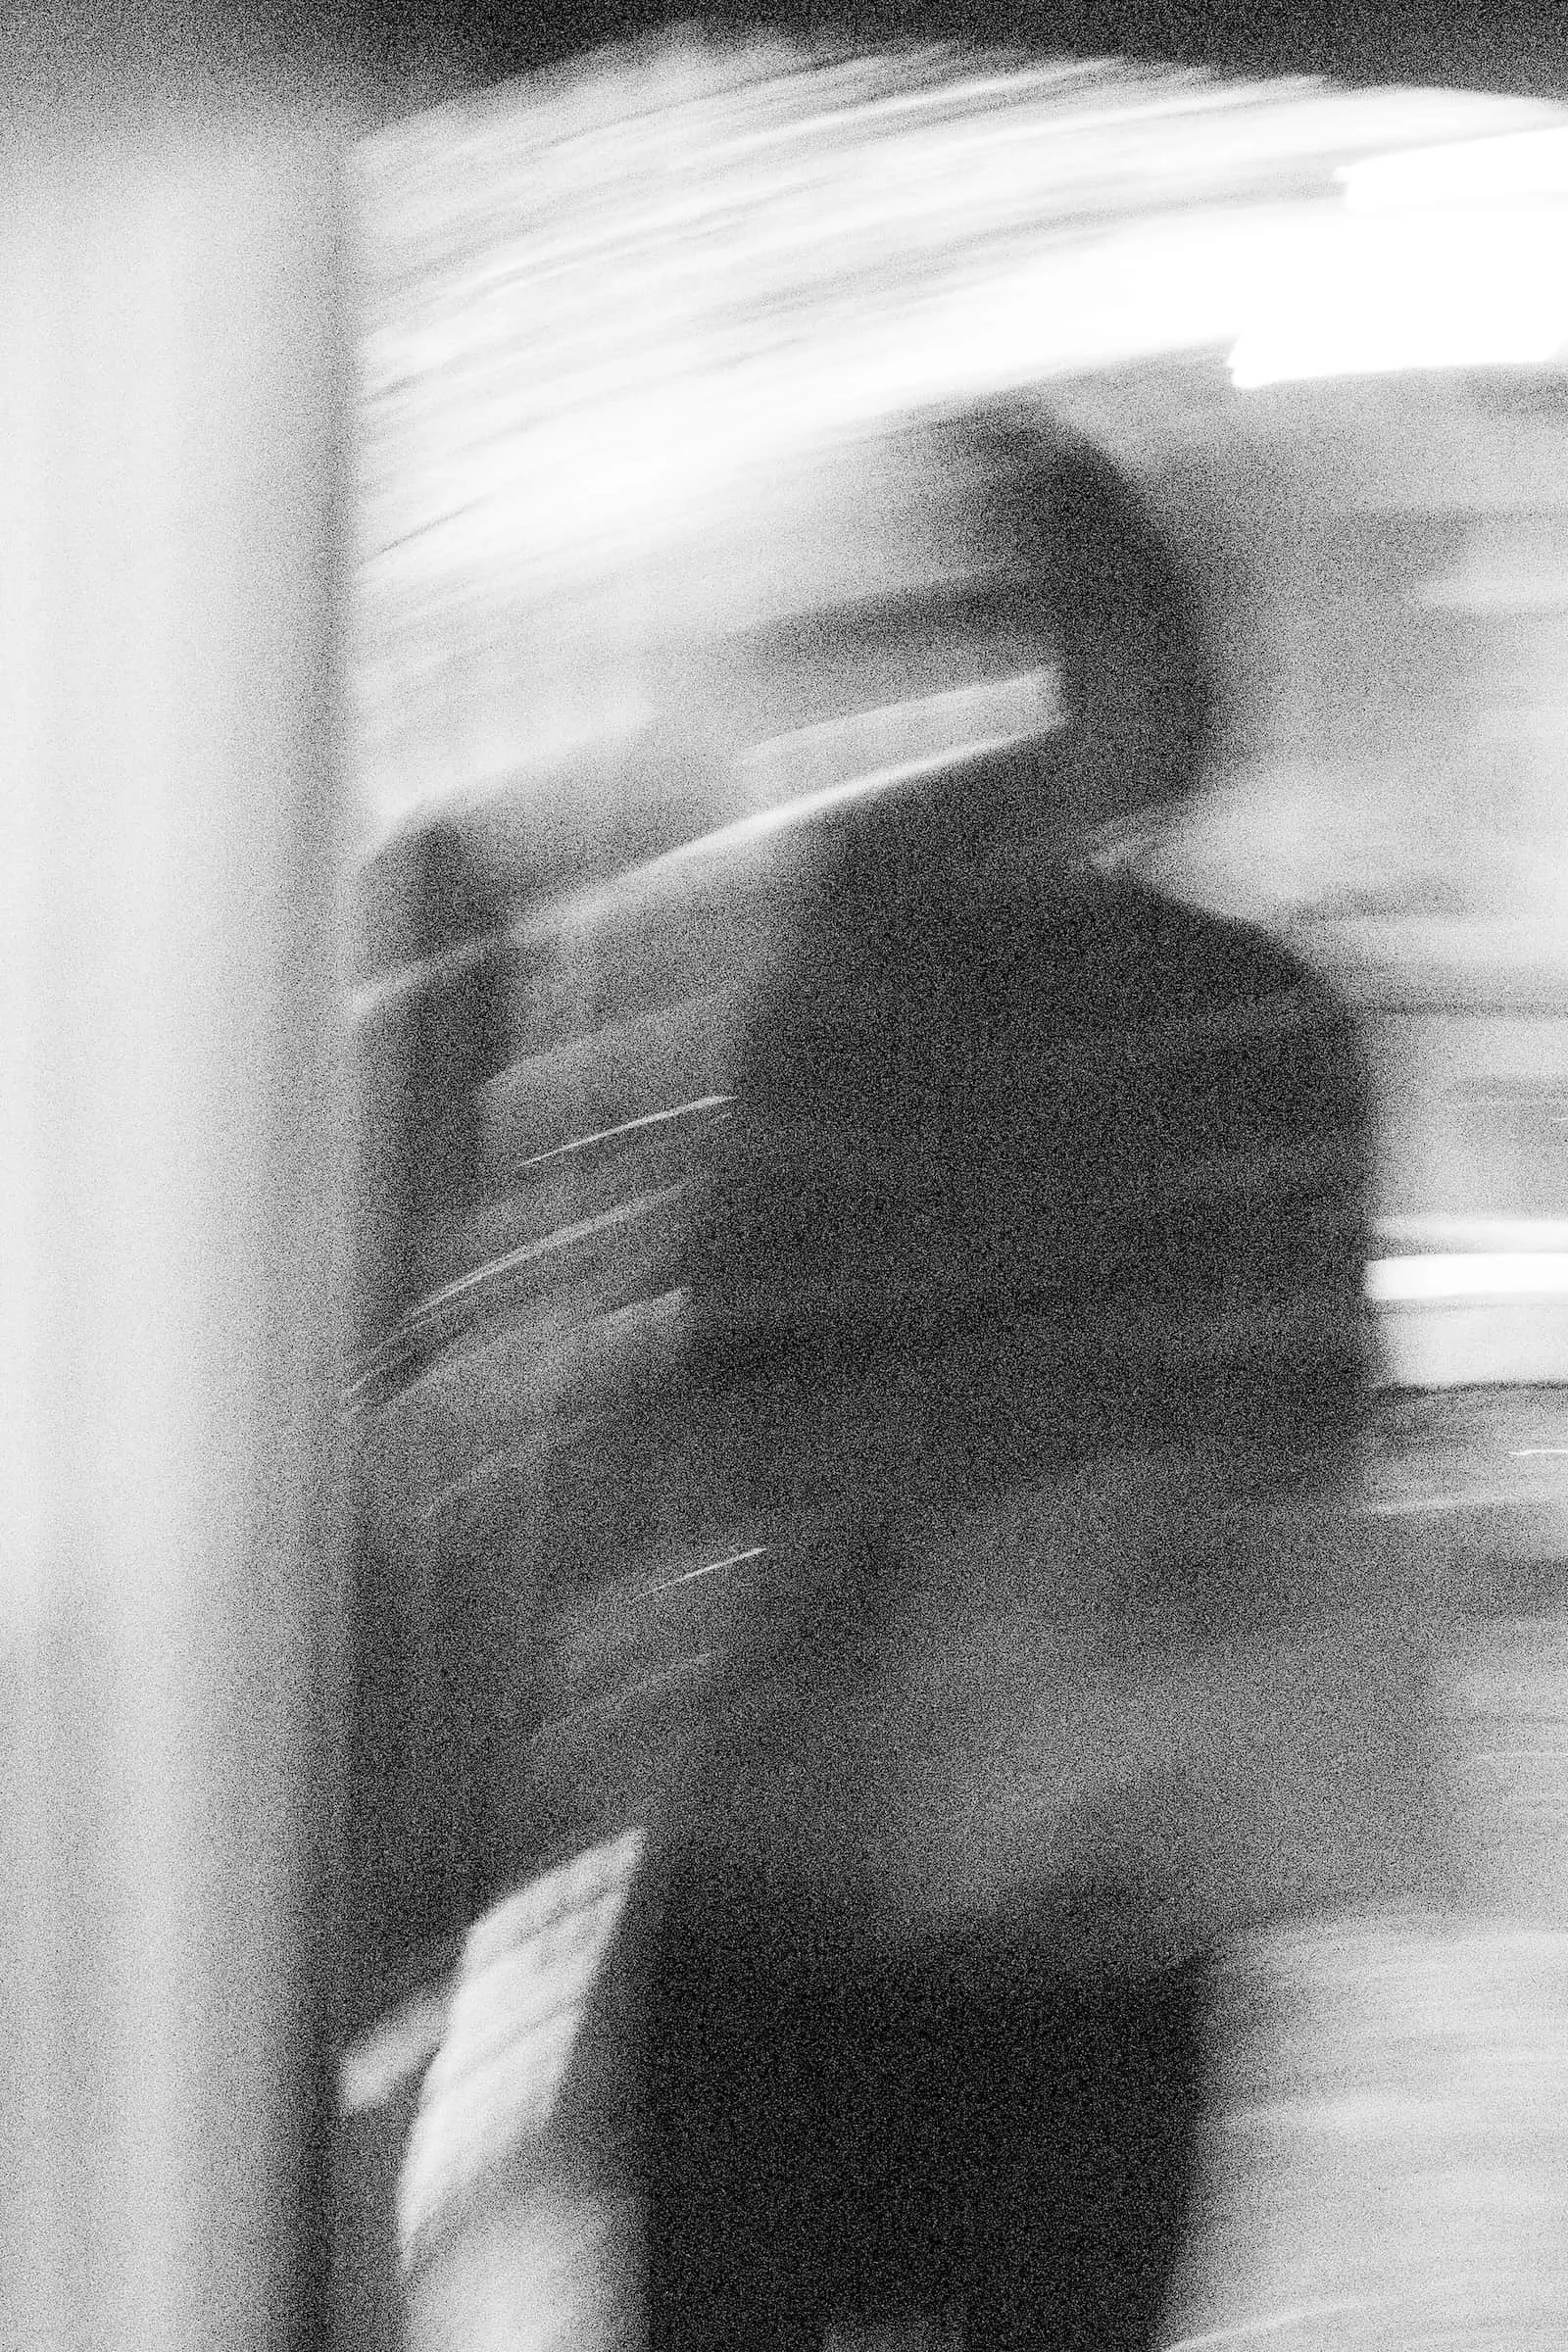 A blurry photo of a woman in a doorway